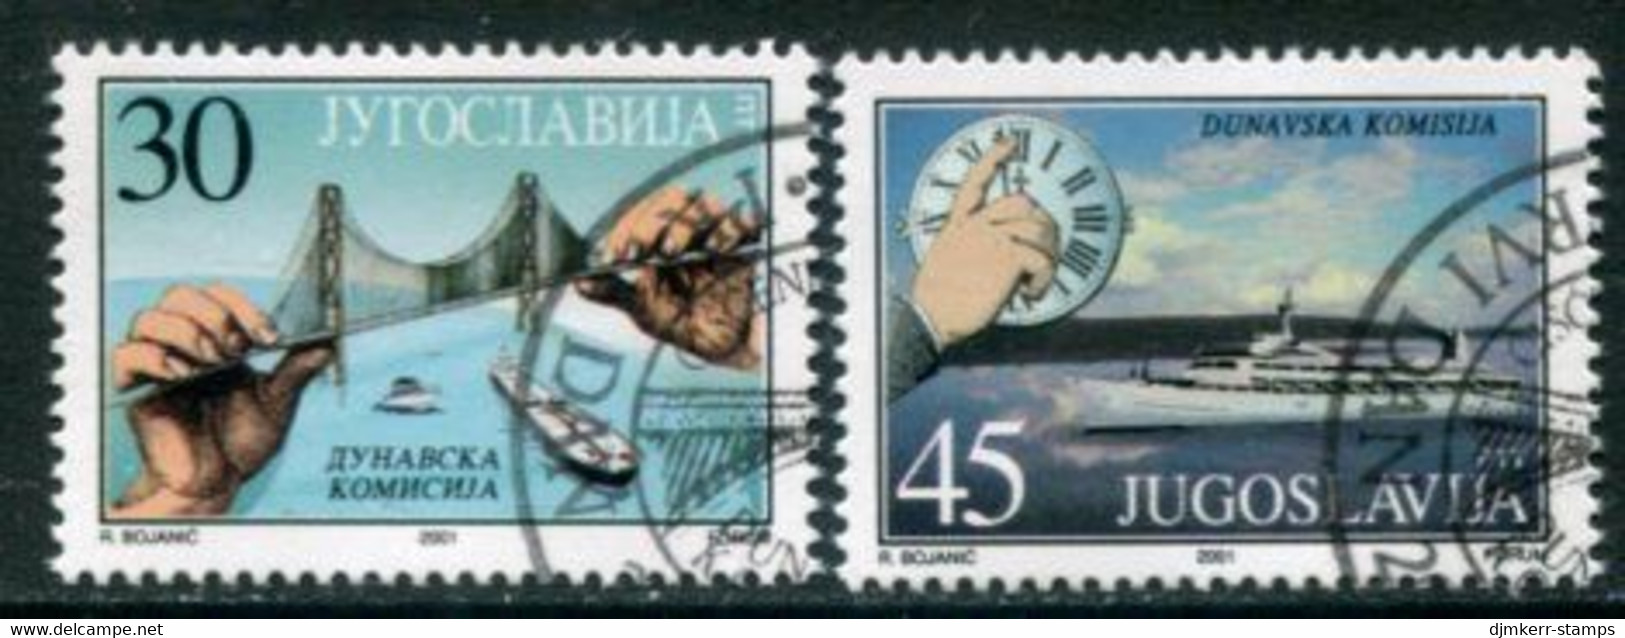 YUGOSLAVIA 2001 Danube Water Purification Used.  Michel 3040-41 - Used Stamps